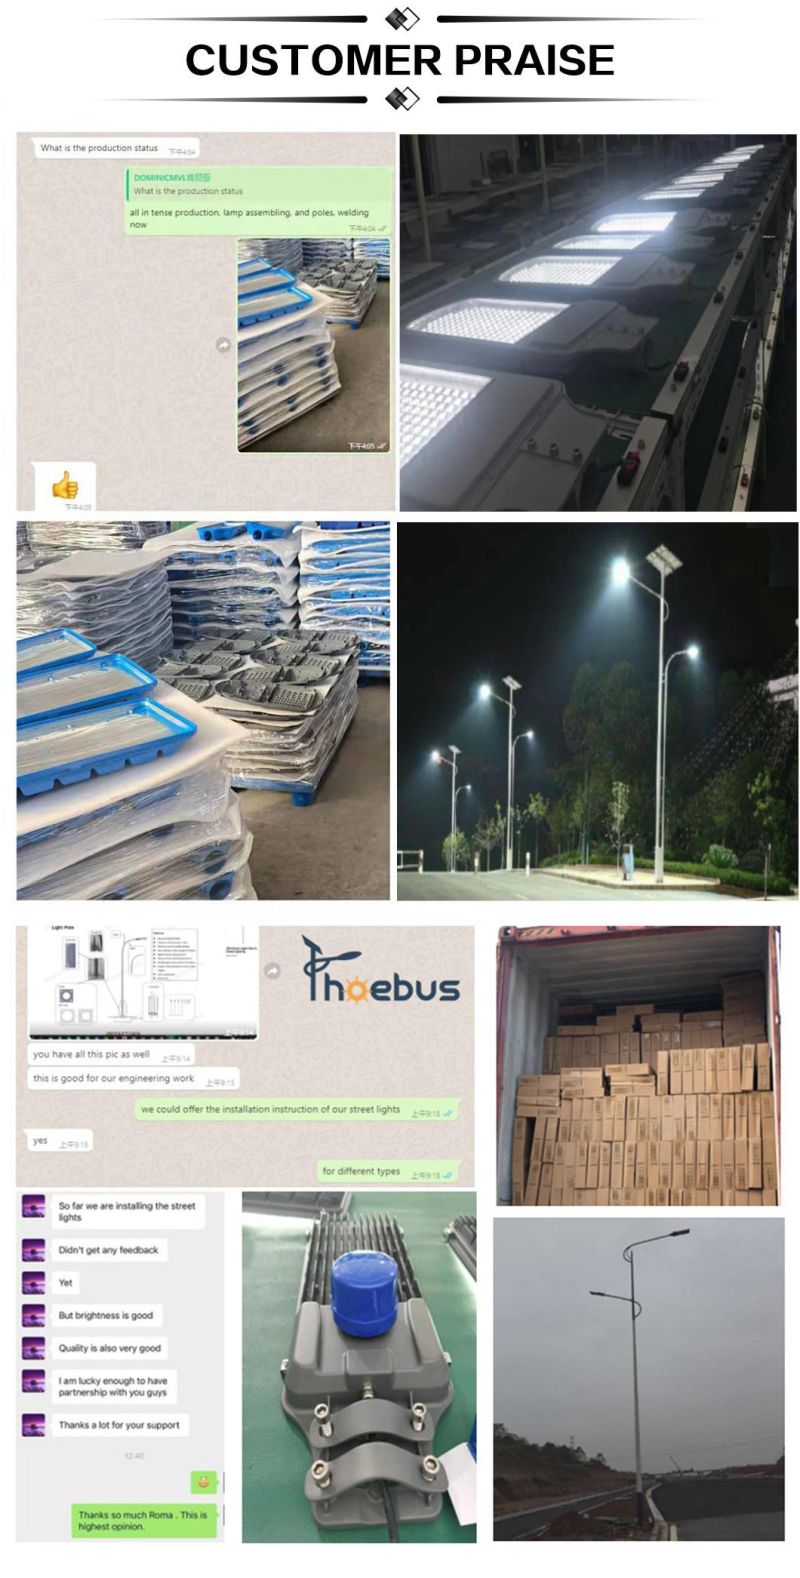 Famous Brand Chip Ultra Bright LED Lamp Outdoor Economic LED Light 150W